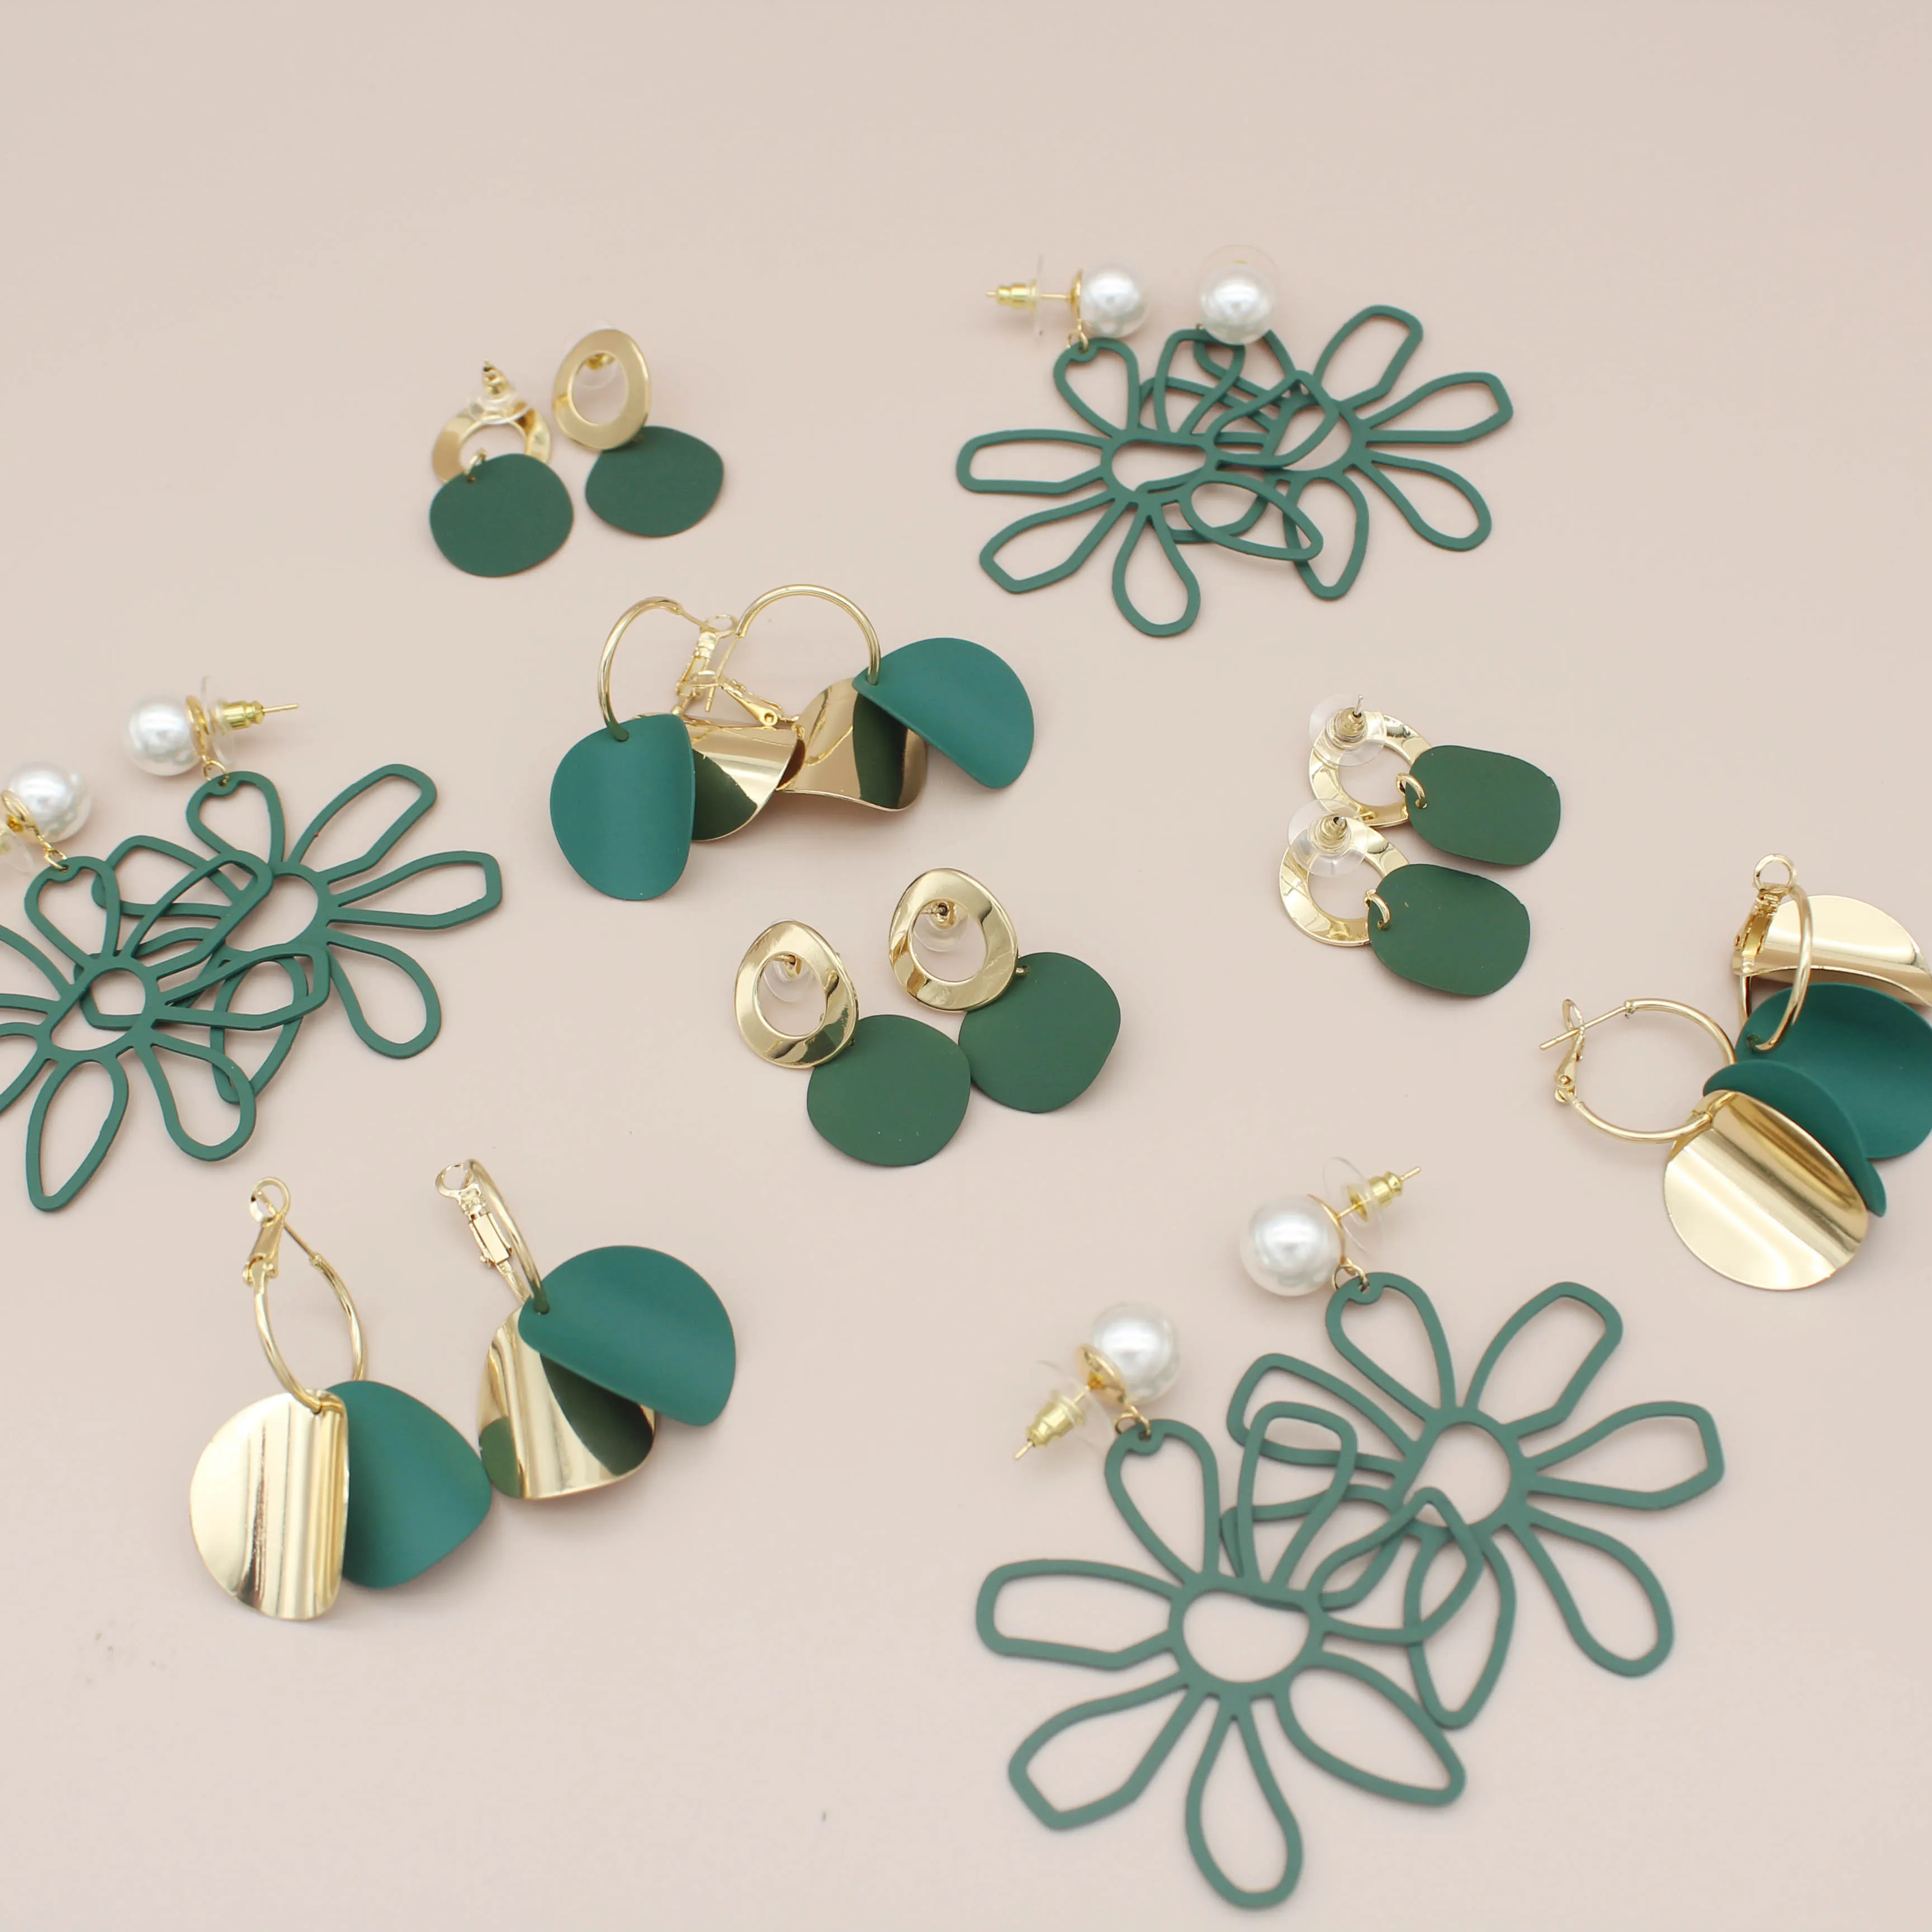 

Jachon Wholesale Earrings Trendy Summer Green Style Retro Alloy Drop Earrings For Women And Girls, Same as the pic